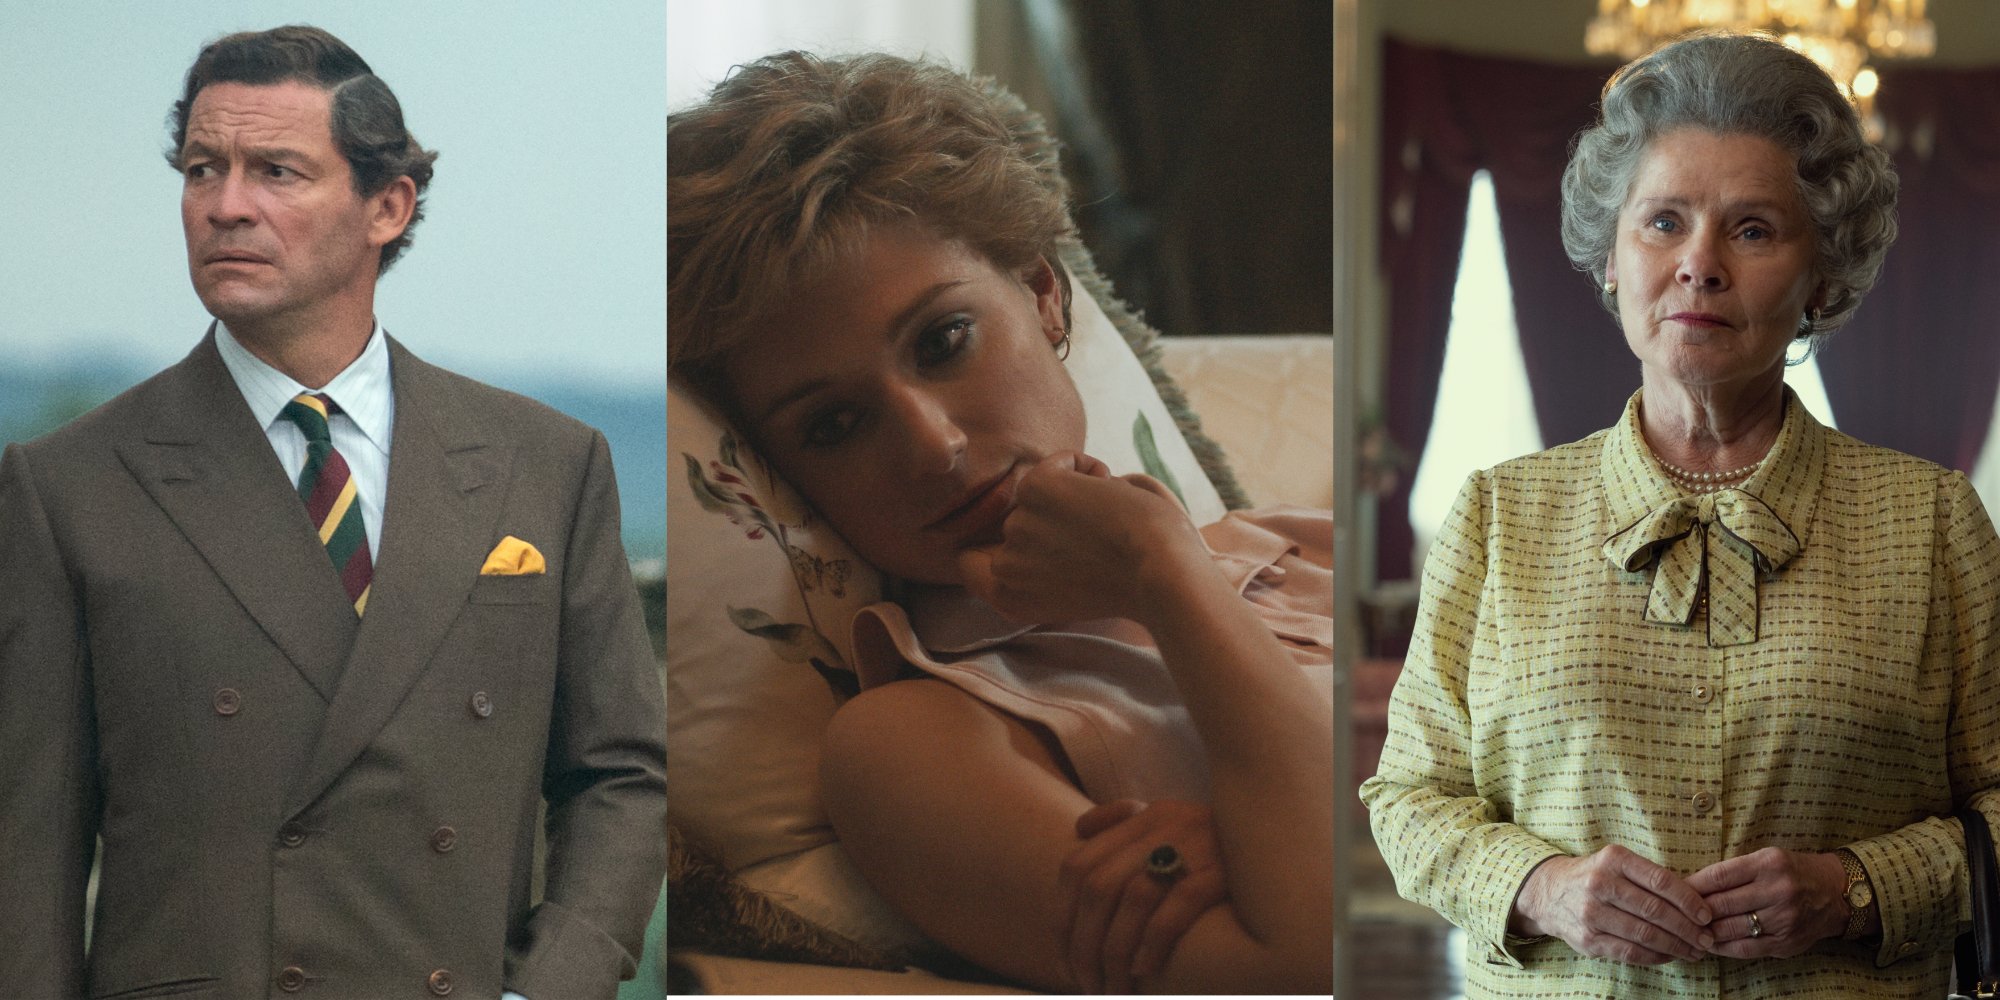 Scene stills from 'The Crown' season 5 include Dominic West, Elizabeth Debicki and Imelda Staunton as members of the royal famly.